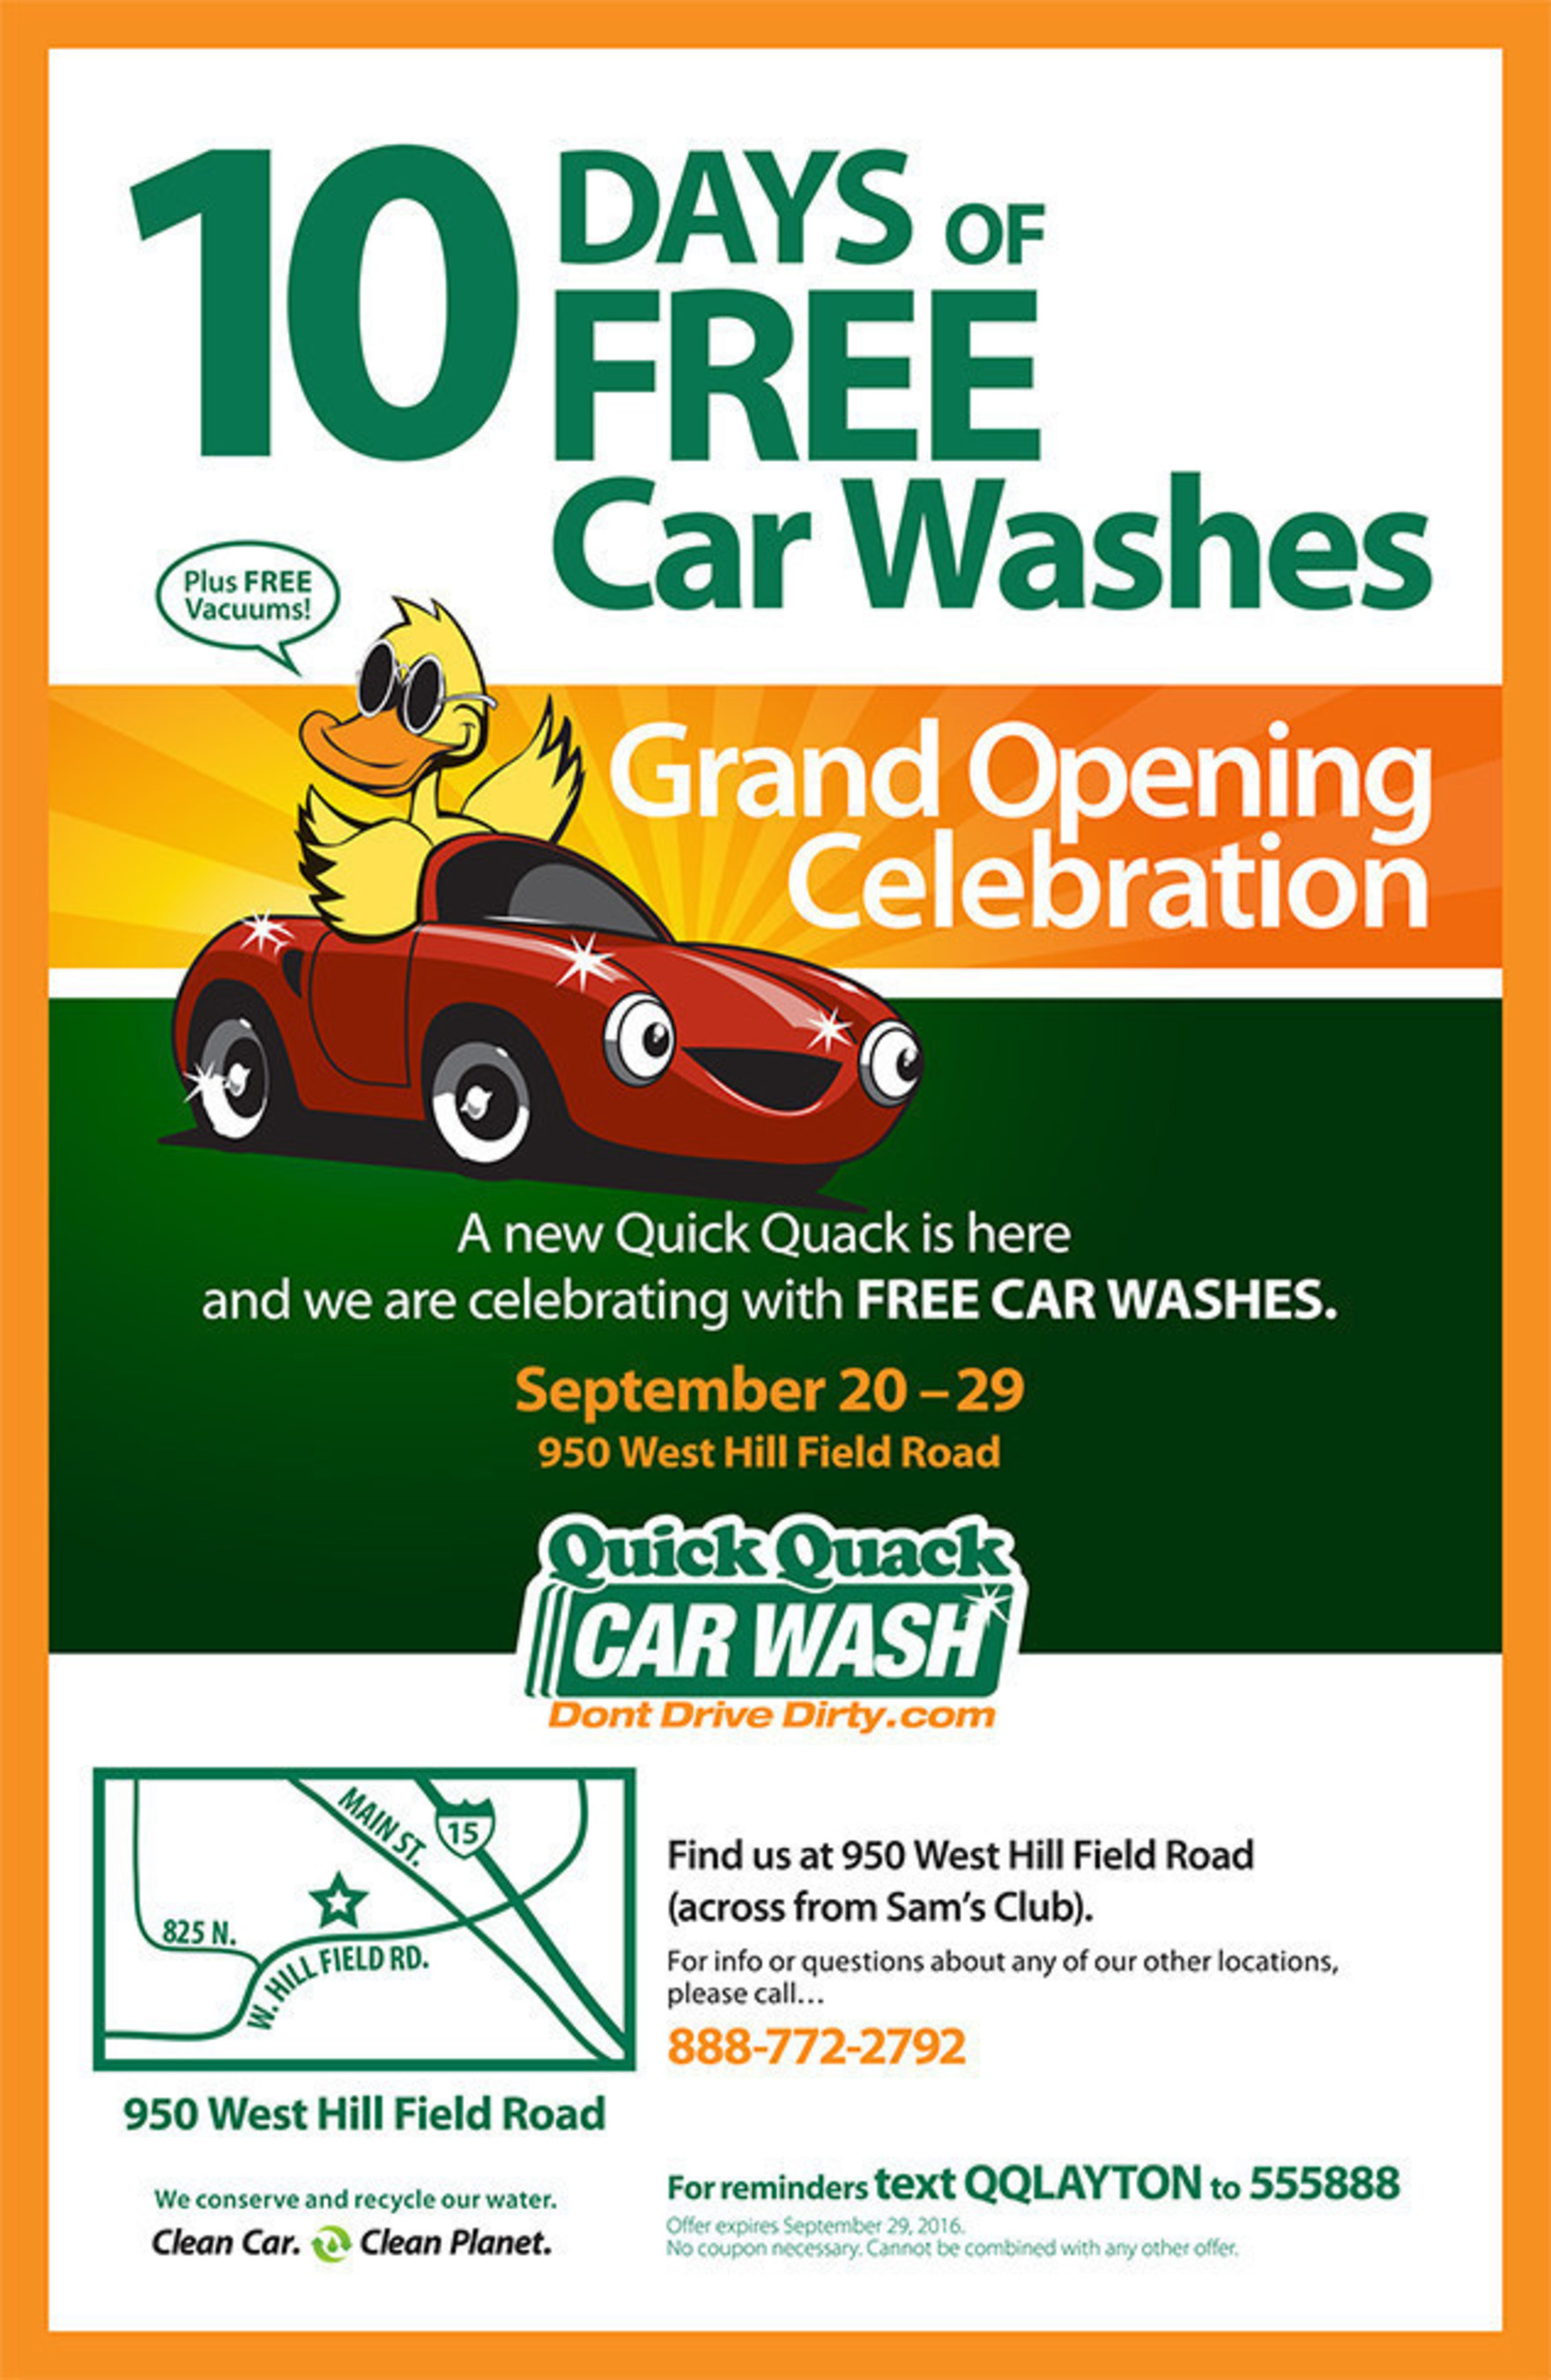 New Quick Quack Car Wash in Layton will offer 10 days of Free Car Washes for its Grand Opening